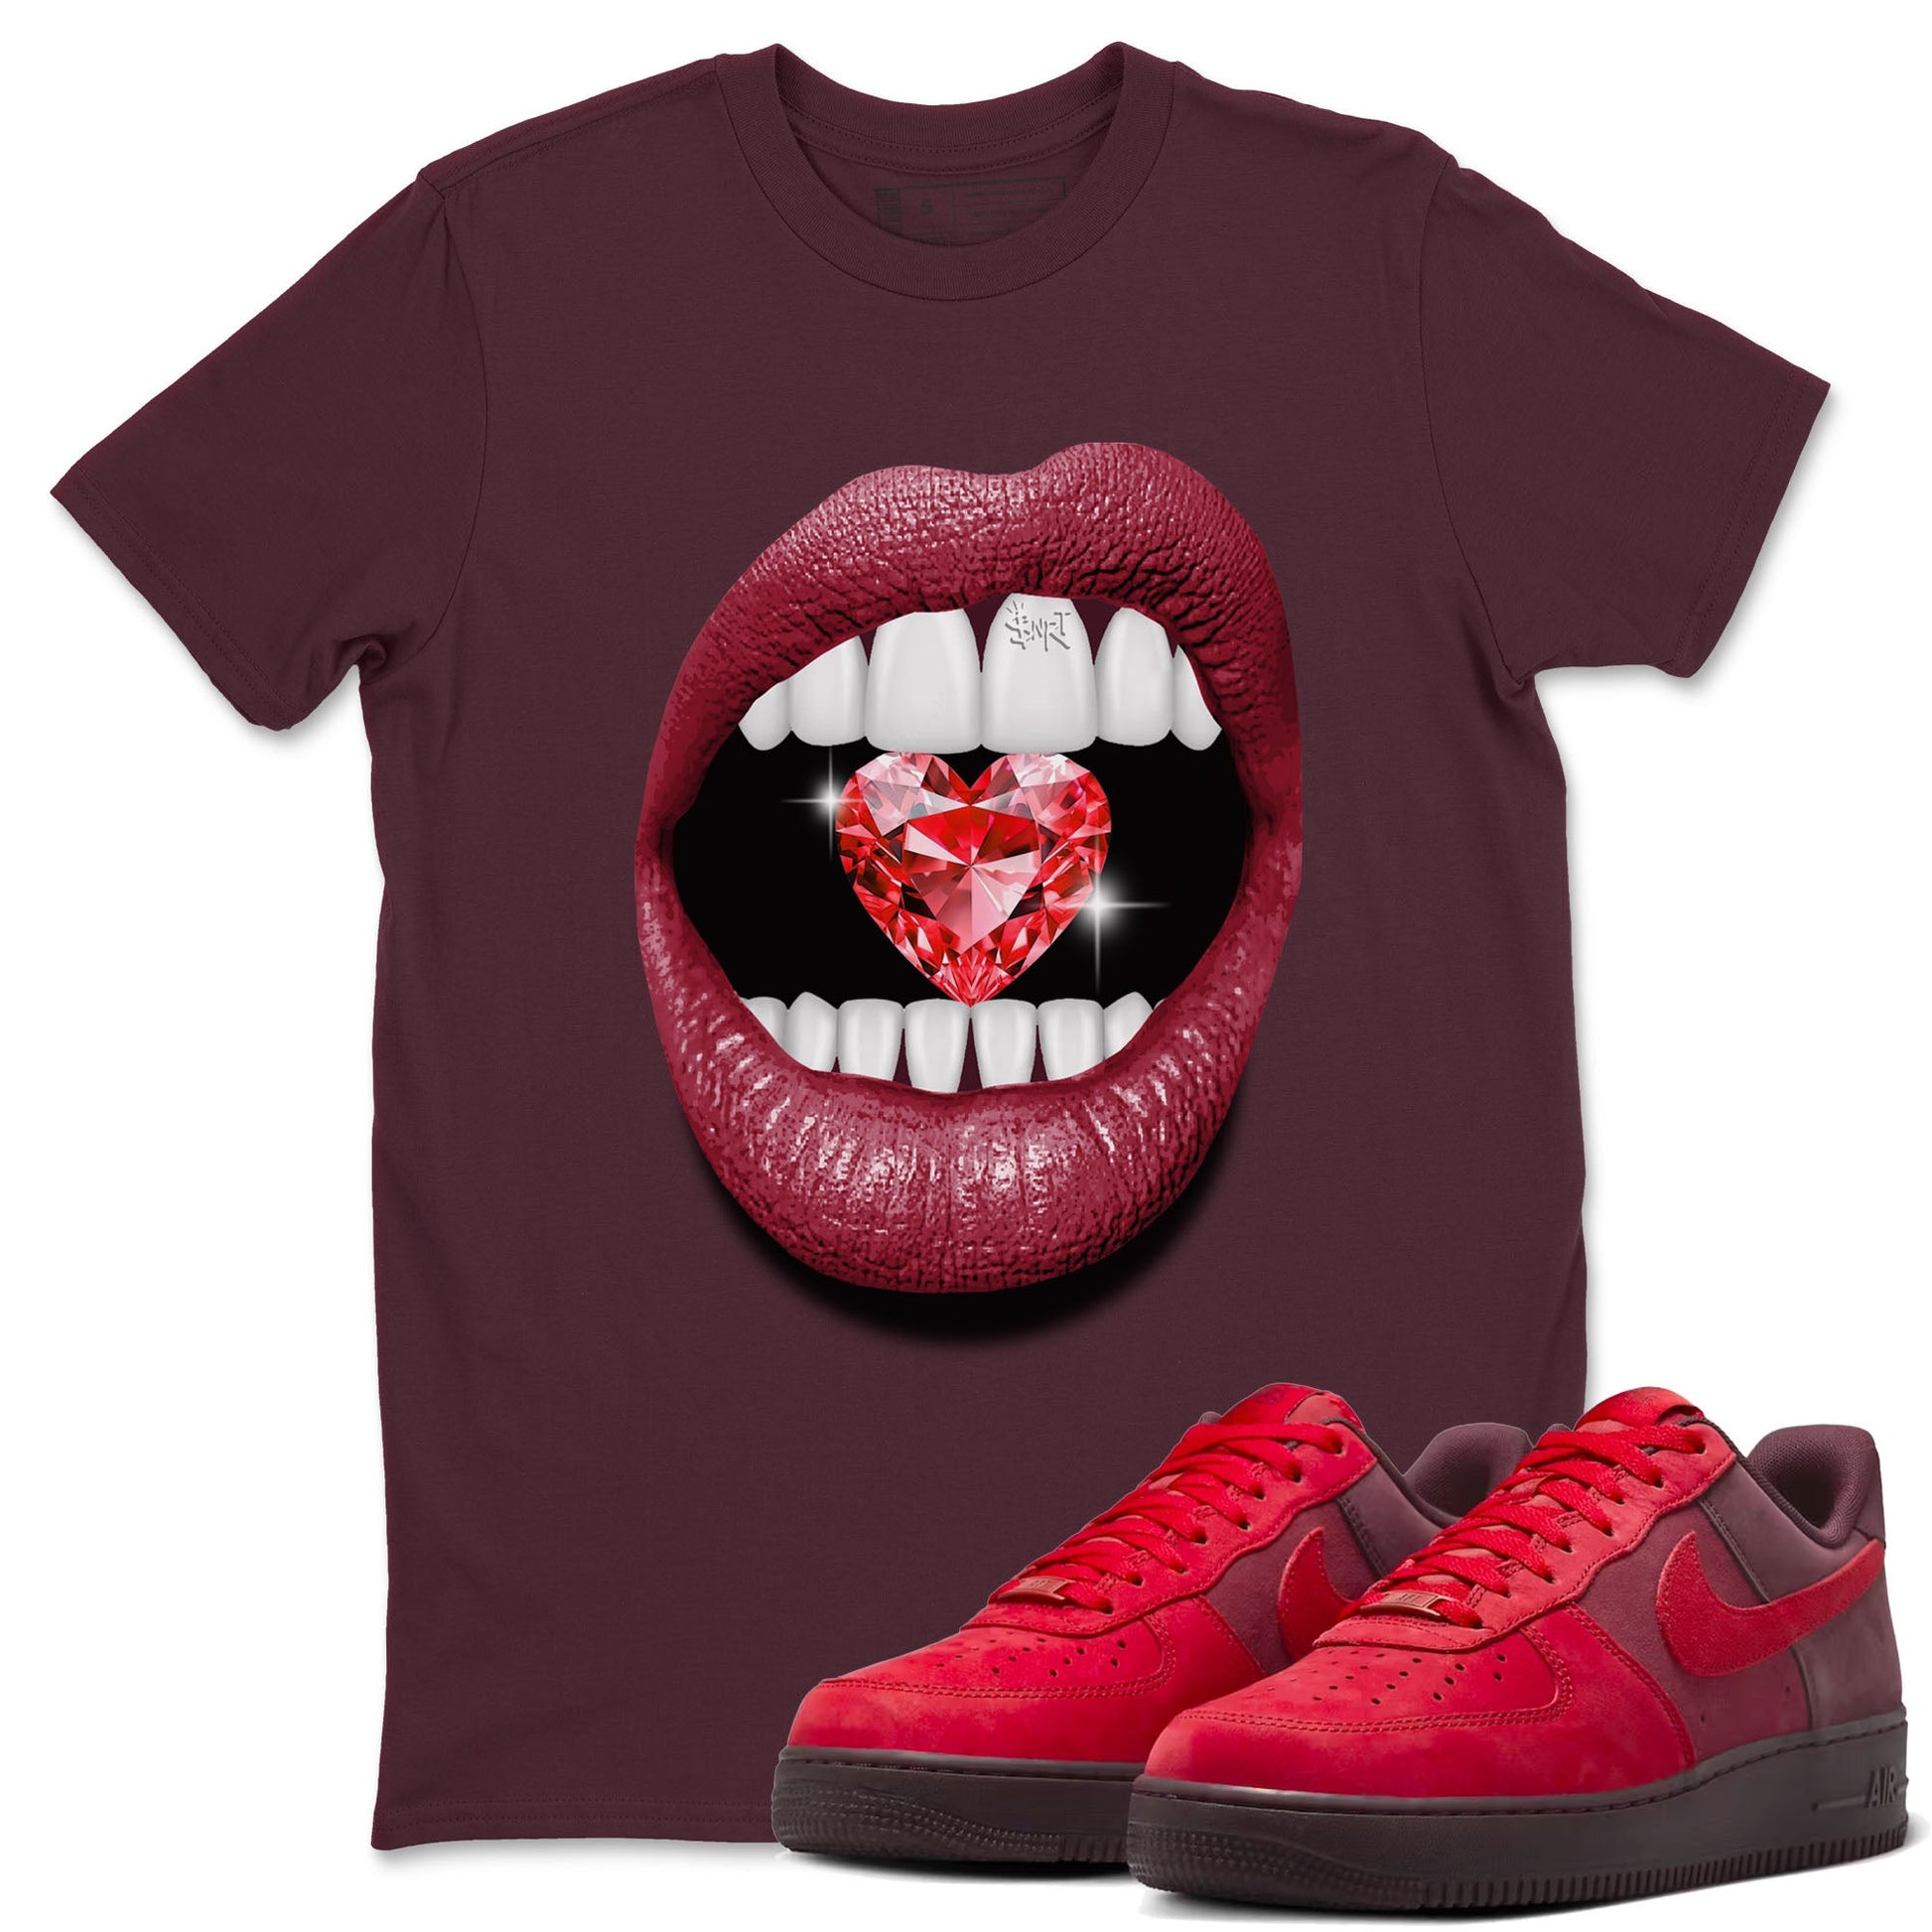 Lips Heart Diamond sneaker match tees to Special Valentine's Day street fashion brand for shirts to match Jordans SNRT Sneaker Tees Air Force 1 Valentines Day unisex t-shirt Maroon 1 unisex shirt